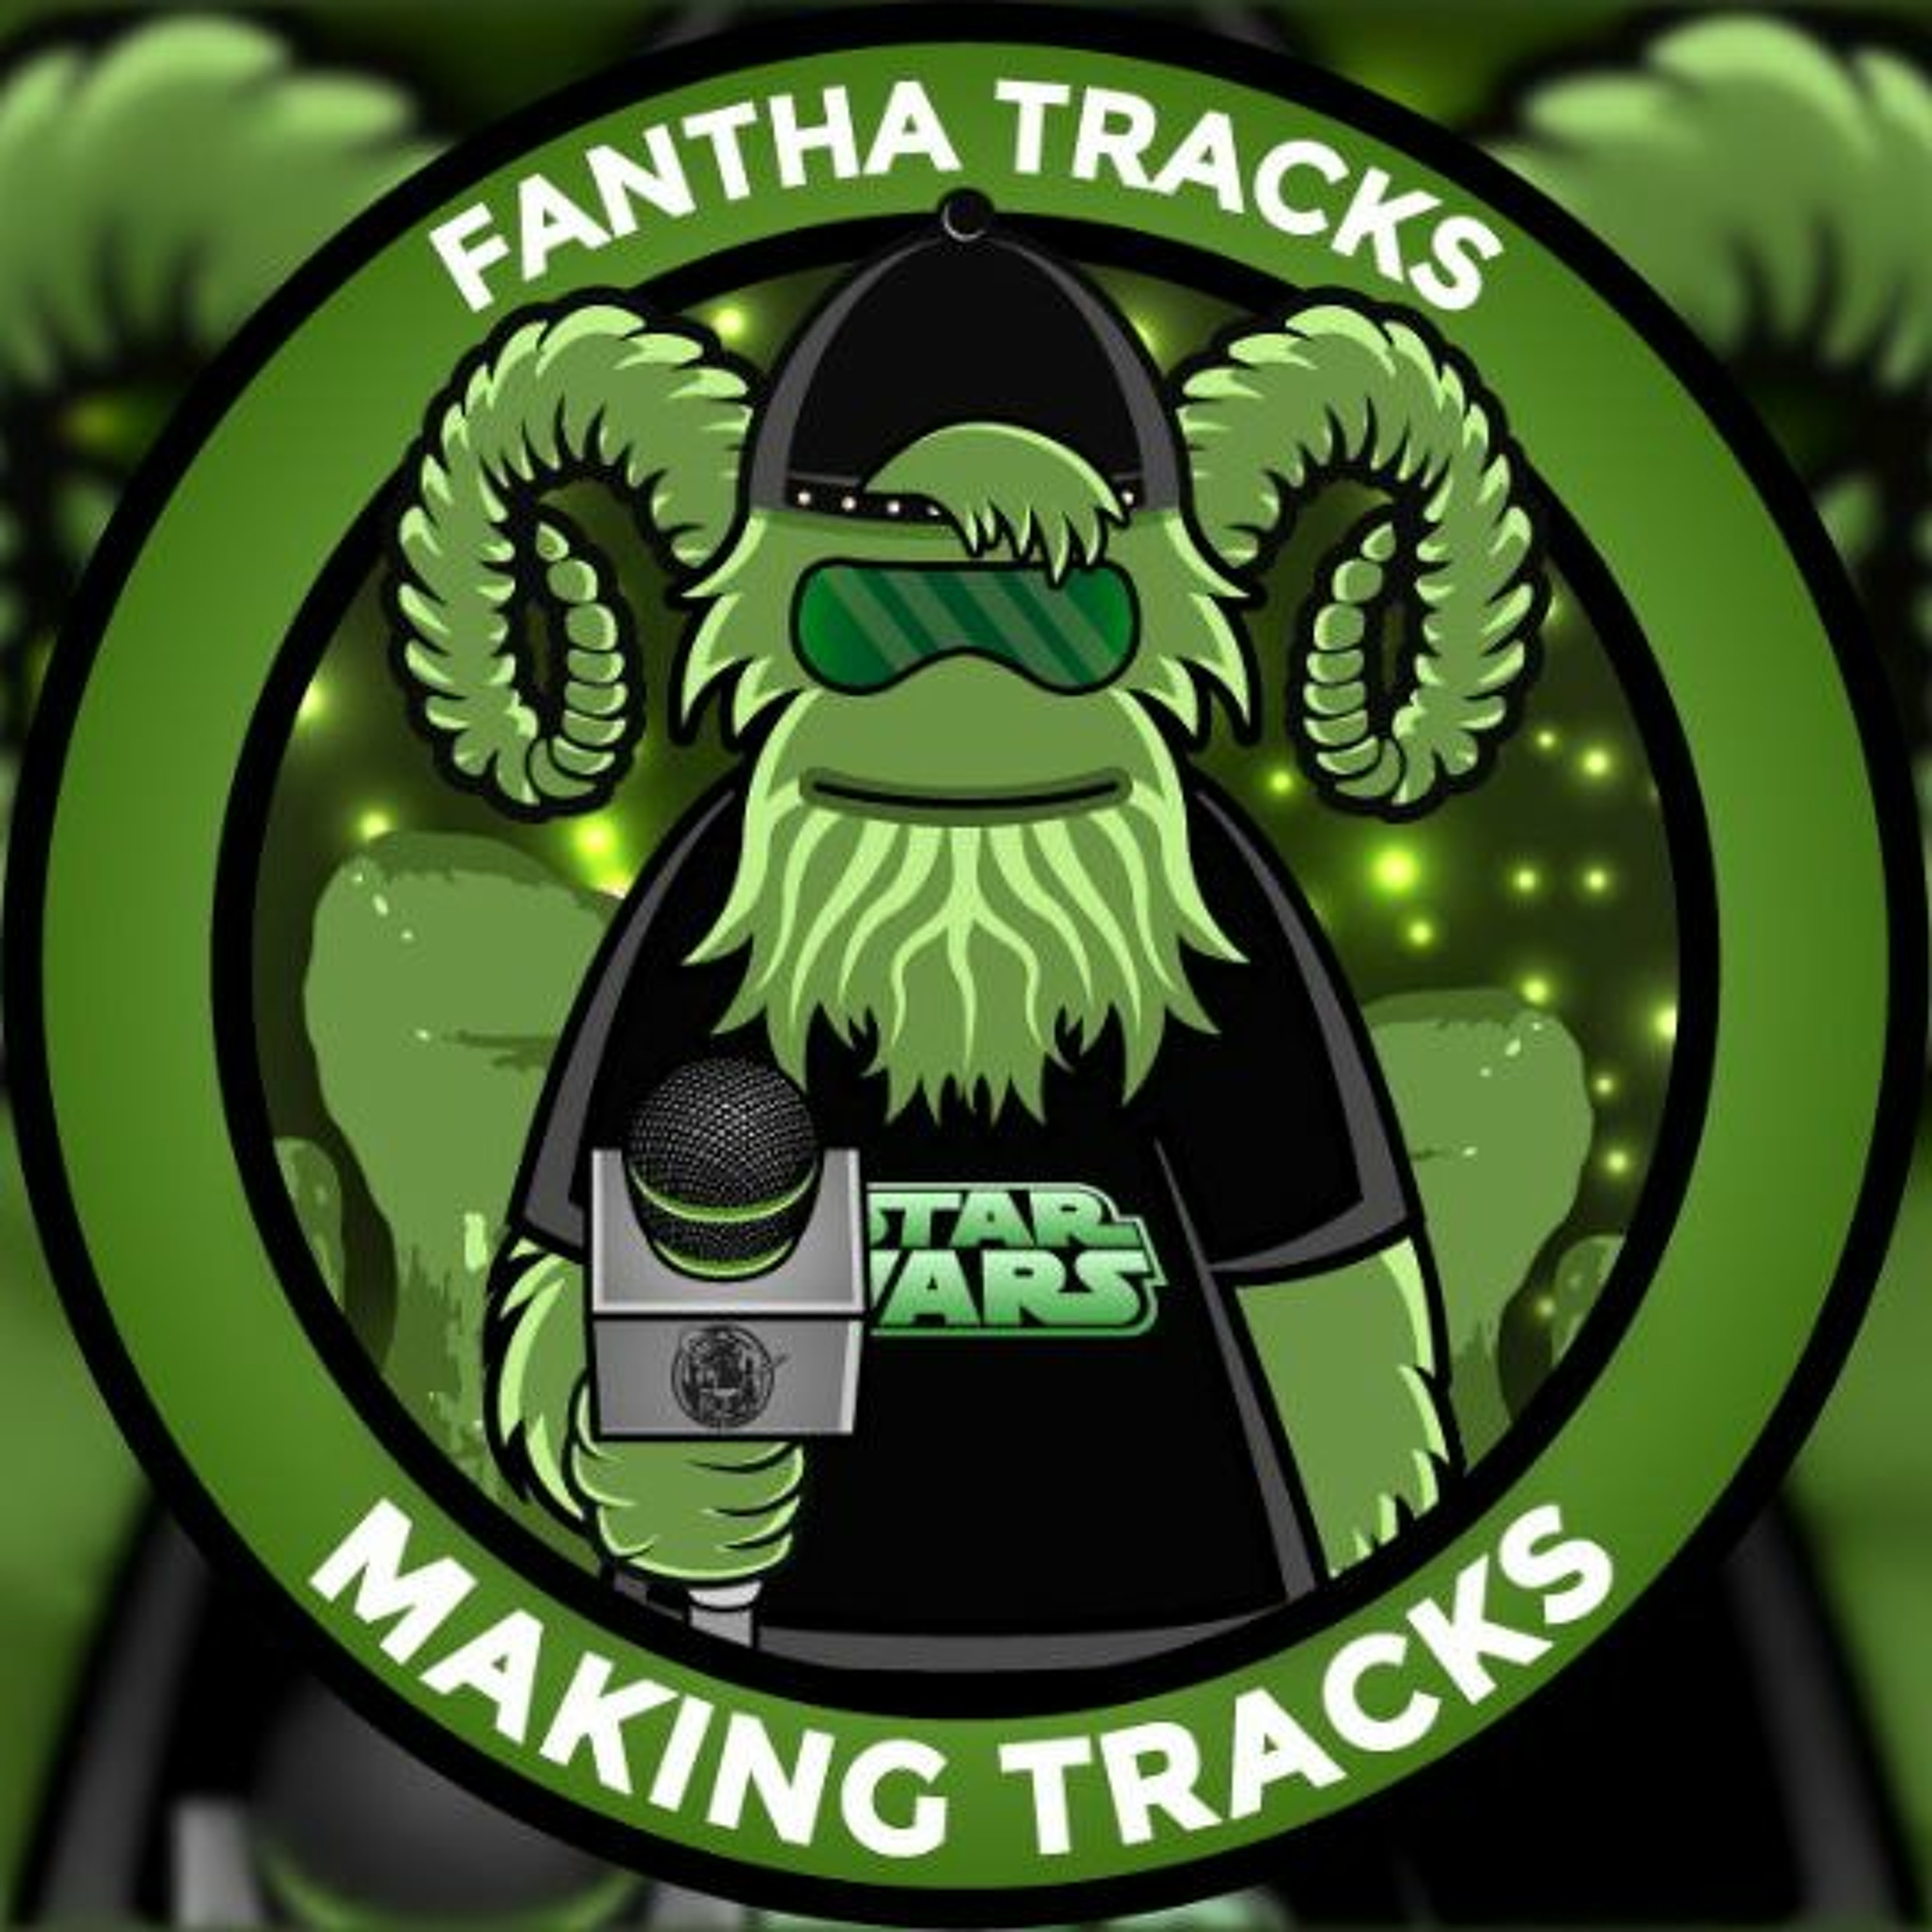 Making Tracks Episode 177: Anticipation is a beautiful thing